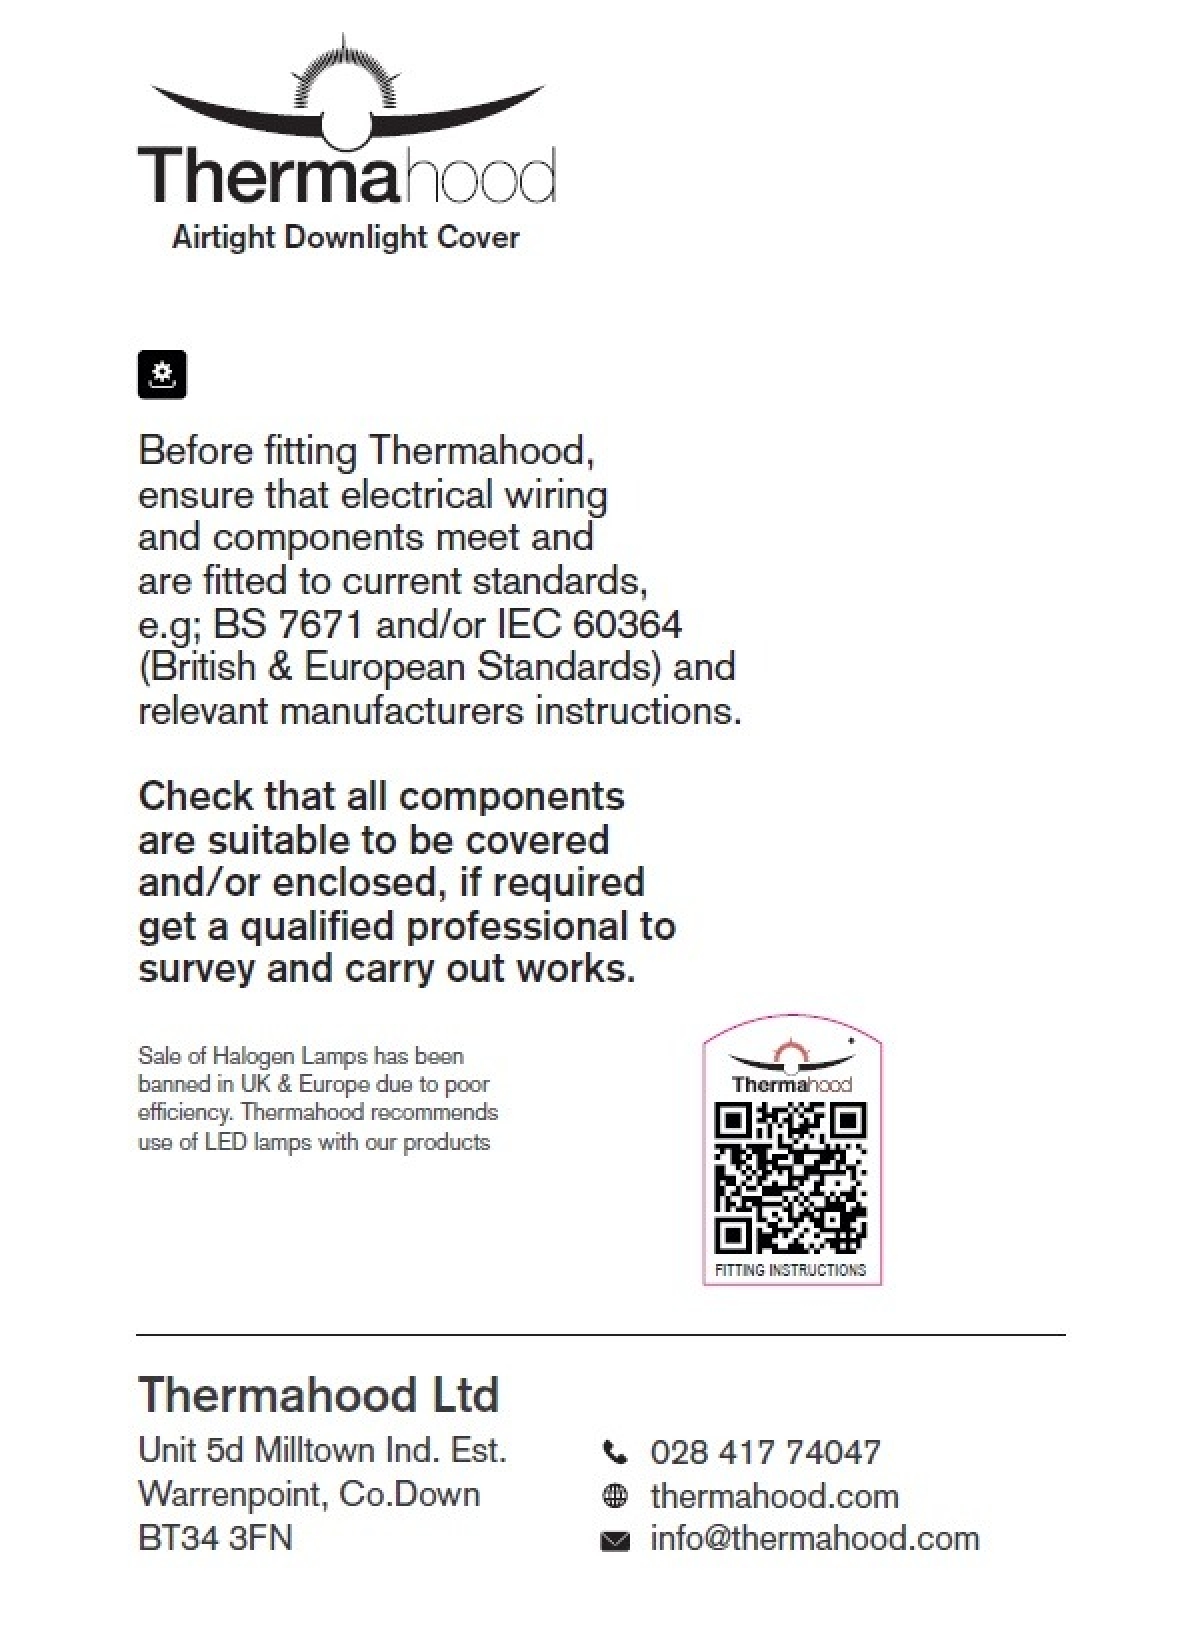 Thermahood fitting instructions